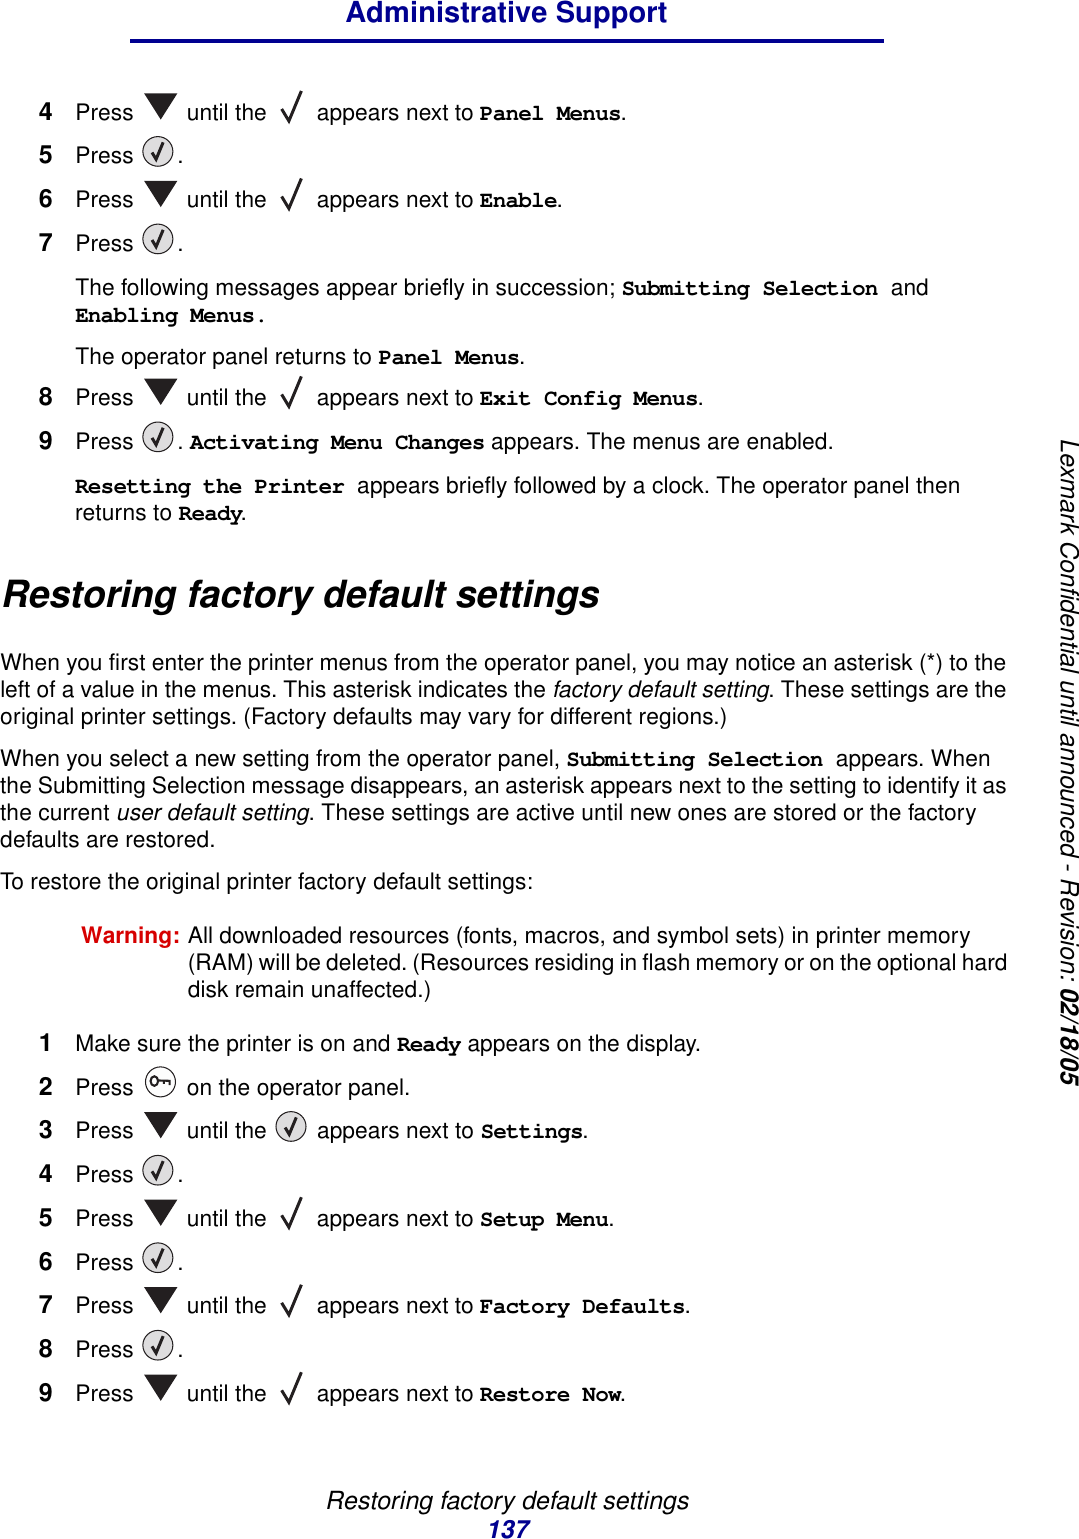 Restoring factory default settings137Administrative SupportLexmark Confidential until announced - Revision: 02/18/054Press   until the   appears next to Panel Menus.5Press . 6Press   until the   appears next to Enable. 7Press . The following messages appear briefly in succession; Submitting Selection and Enabling Menus. The operator panel returns to Panel Menus.8Press   until the   appears next to Exit Config Menus.9Press . Activating Menu Changes appears. The menus are enabled.Resetting the Printer appears briefly followed by a clock. The operator panel then returns to Ready.Restoring factory default settingsWhen you first enter the printer menus from the operator panel, you may notice an asterisk (*) to the left of a value in the menus. This asterisk indicates the factory default setting. These settings are the original printer settings. (Factory defaults may vary for different regions.)When you select a new setting from the operator panel, Submitting Selection appears. When the Submitting Selection message disappears, an asterisk appears next to the setting to identify it as the current user default setting. These settings are active until new ones are stored or the factory defaults are restored.To restore the original printer factory default settings:Warning: All downloaded resources (fonts, macros, and symbol sets) in printer memory (RAM) will be deleted. (Resources residing in flash memory or on the optional hard disk remain unaffected.)1Make sure the printer is on and Ready appears on the display.2Press   on the operator panel.3Press   until the   appears next to Settings.4Press .5Press   until the   appears next to Setup Menu.6Press .7Press   until the   appears next to Factory Defaults.8Press .9Press   until the   appears next to Restore Now.